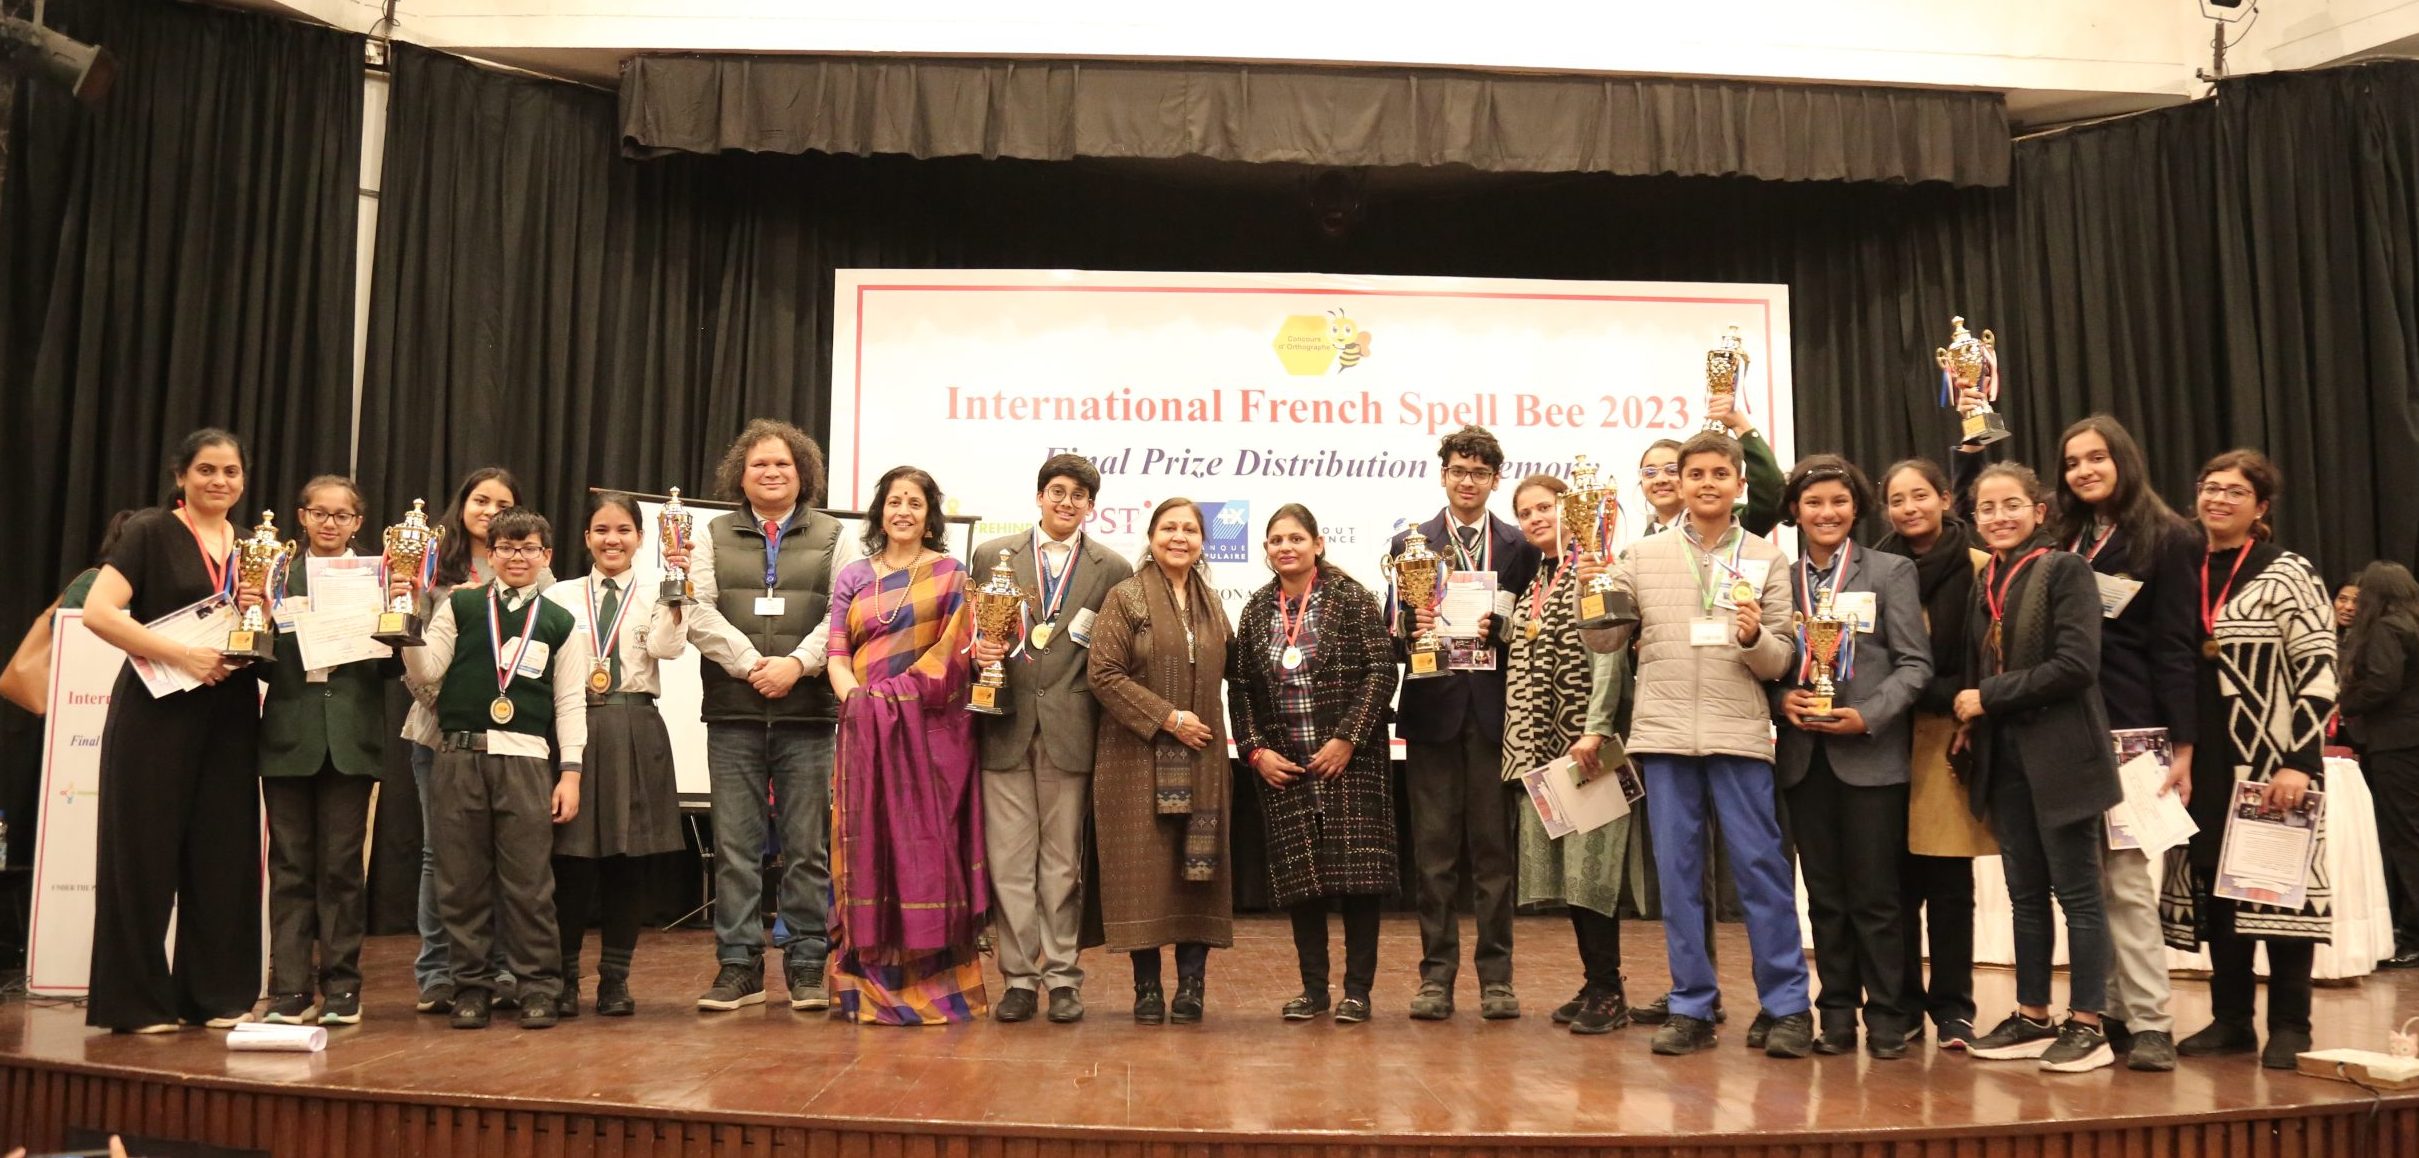 Culmination of Excellence: The Unforgettable Closing Ceremony of the International French Spell Bee by Le Frehindi